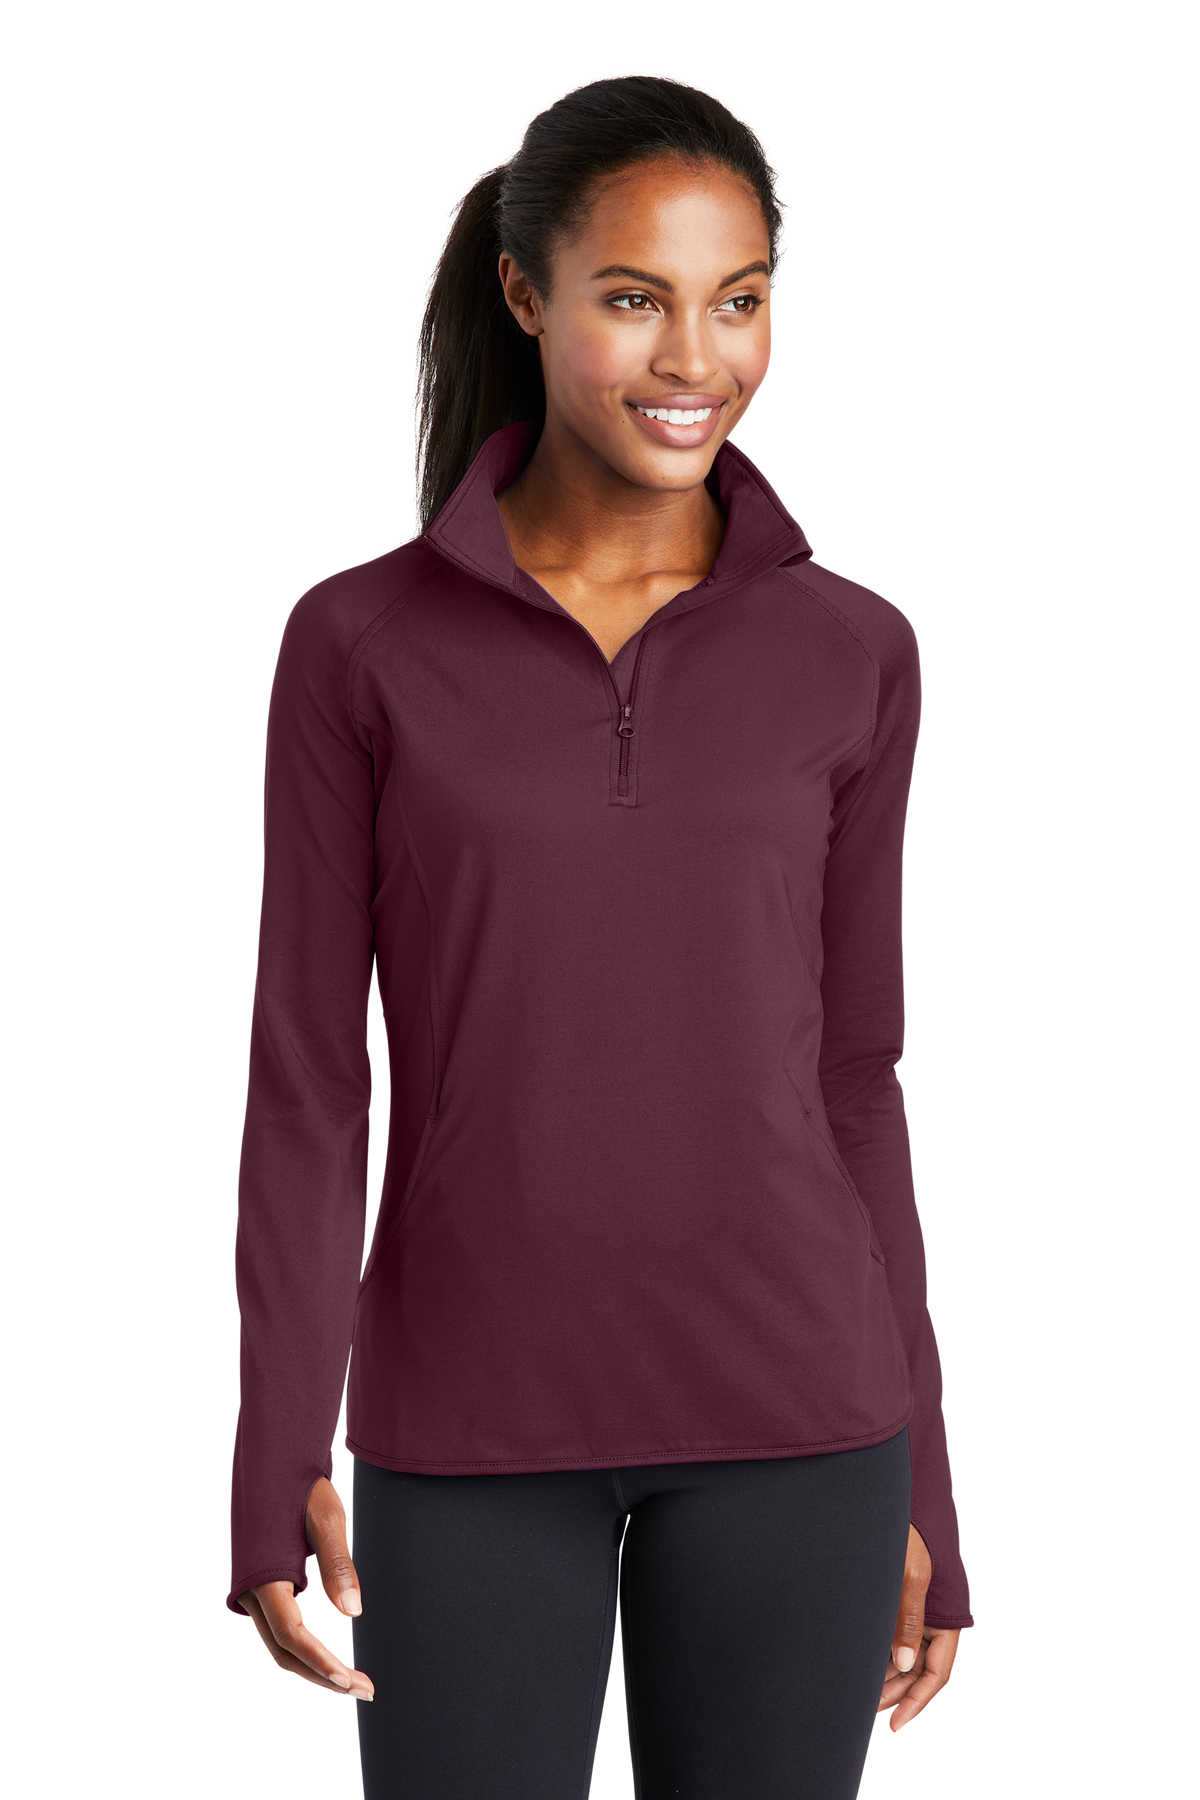 Spyder Sunset Zip T-Neck Top - Women's, Berry, Large, — Womens Clothing  Size: Large, Sleeve Length: Long Sleeve, Age Group: Adults, Apparel Fit:  Athletic, Fitted — 193069662L